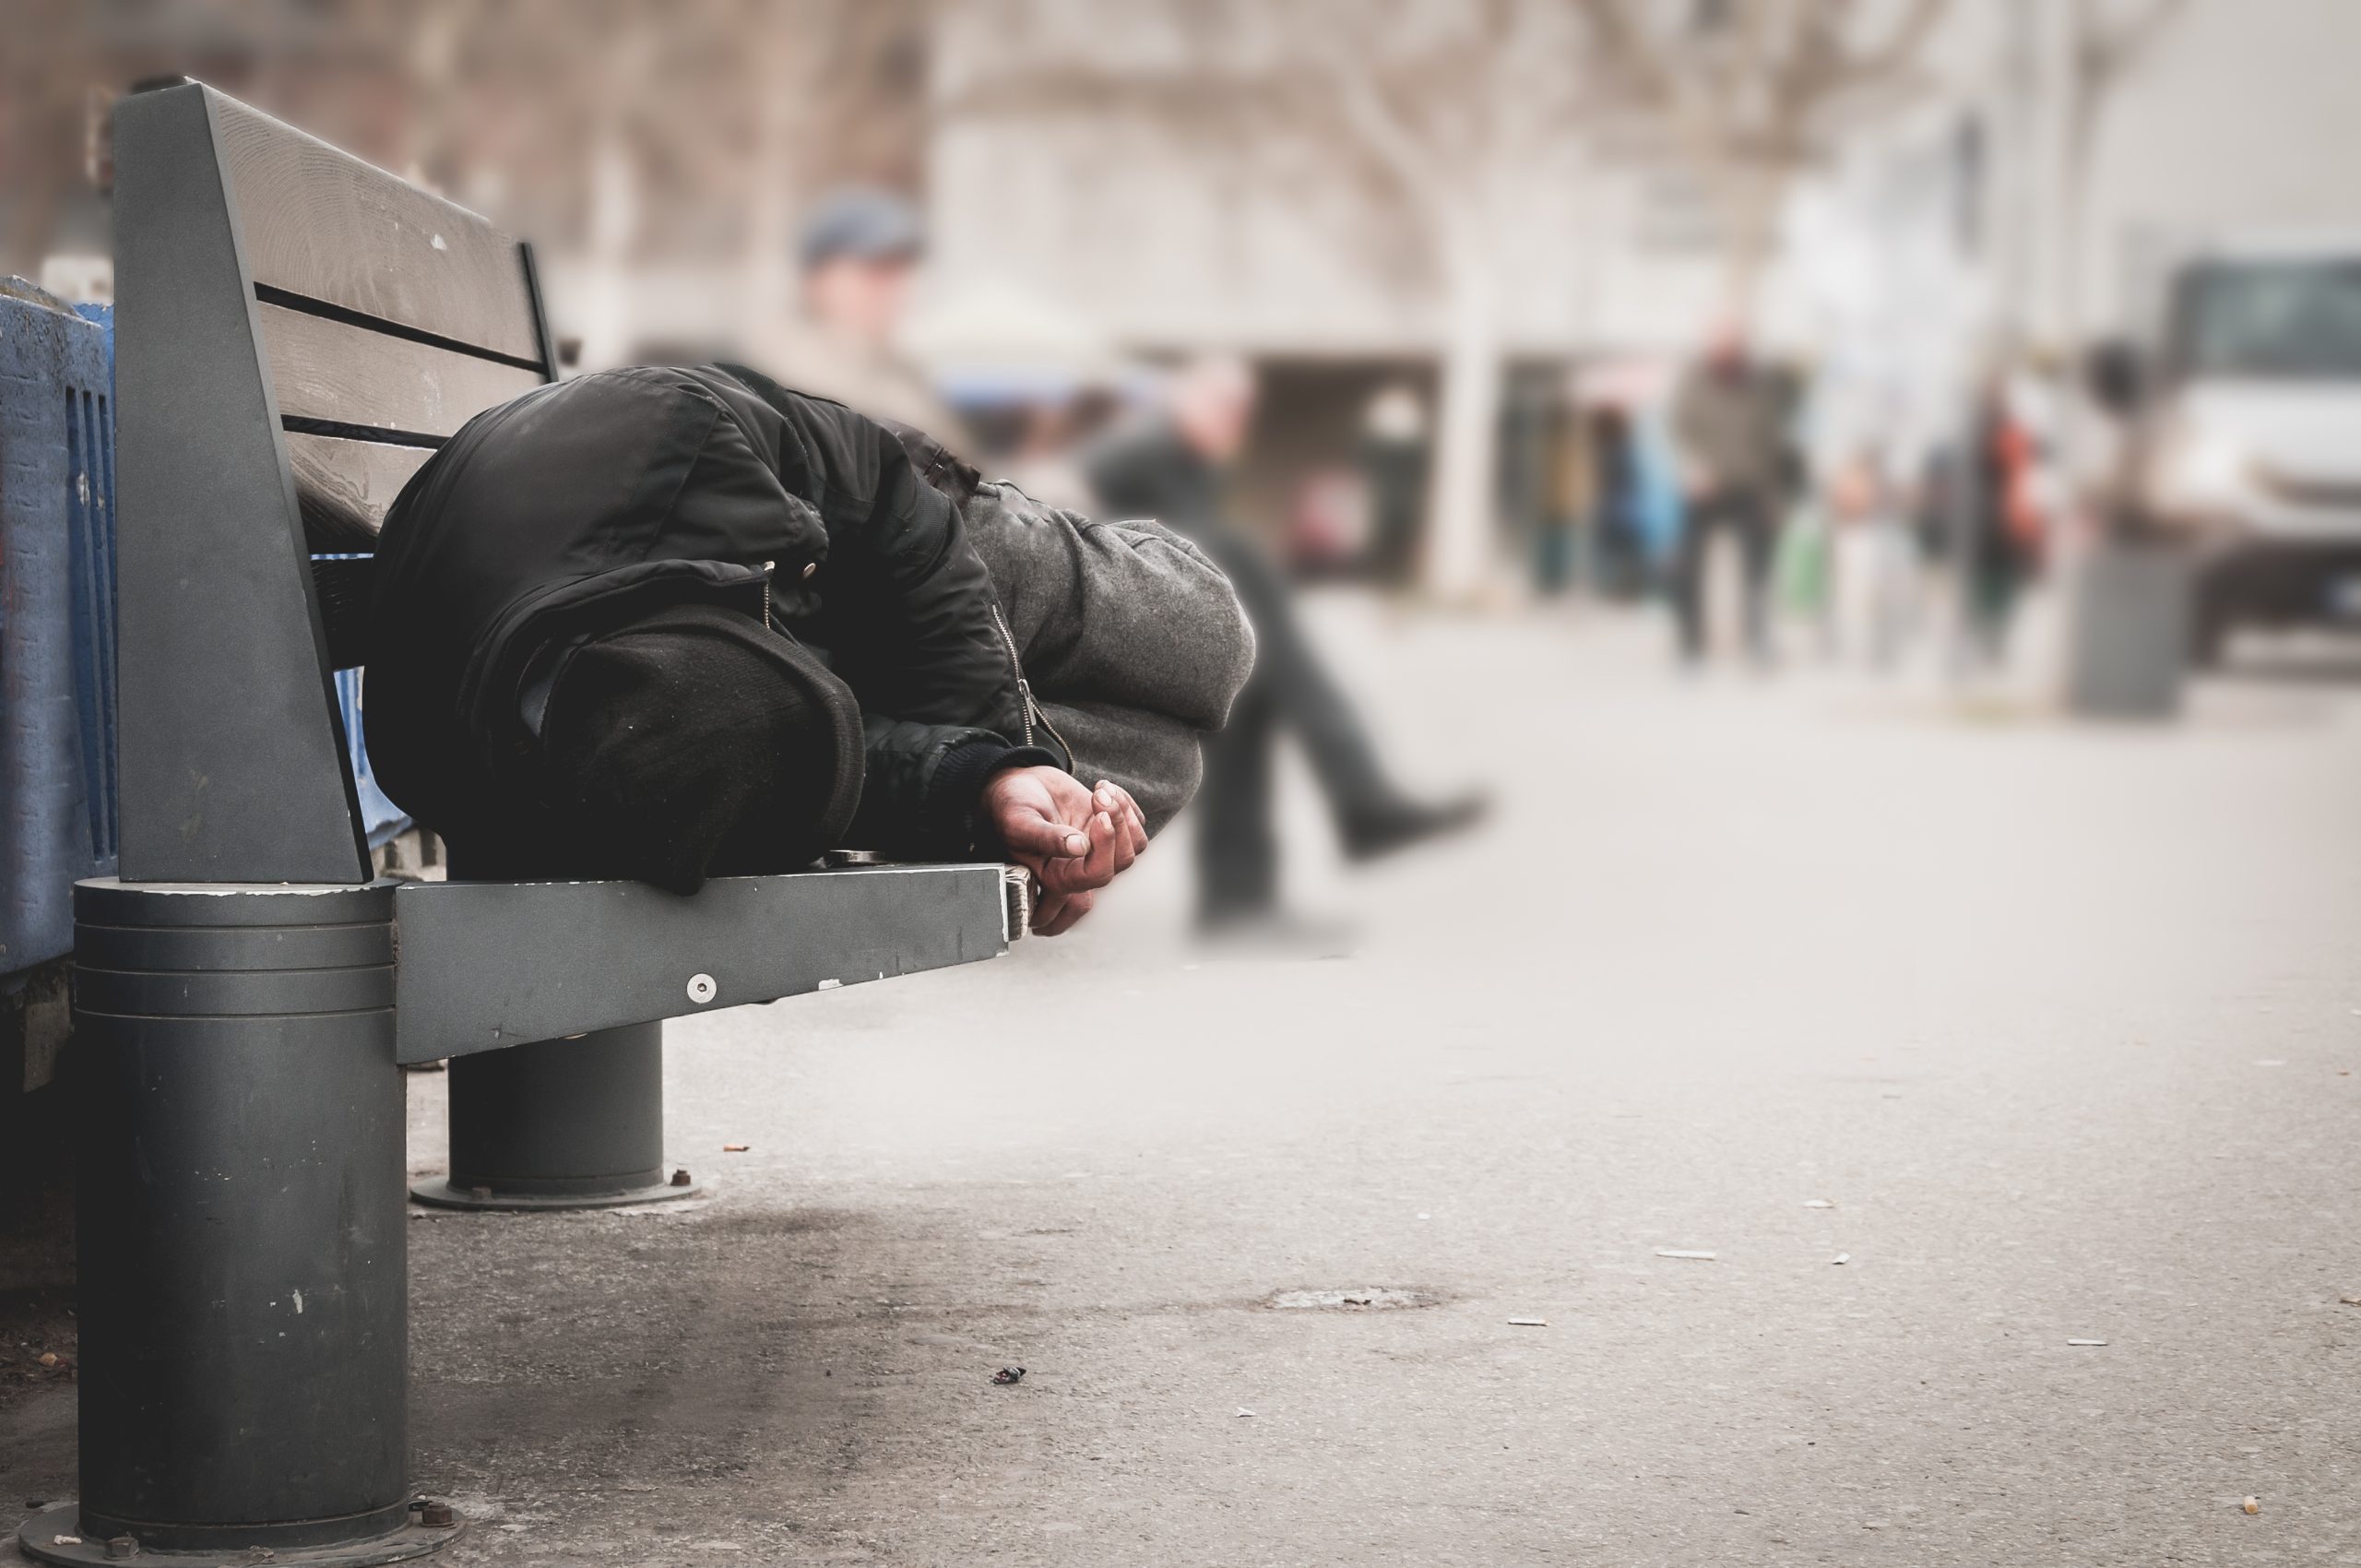 photo of a person experiencing homelessness sleeping on a bench in a city, emphasizing the challenges faced by individuals with severe mental illness who lack stable housing